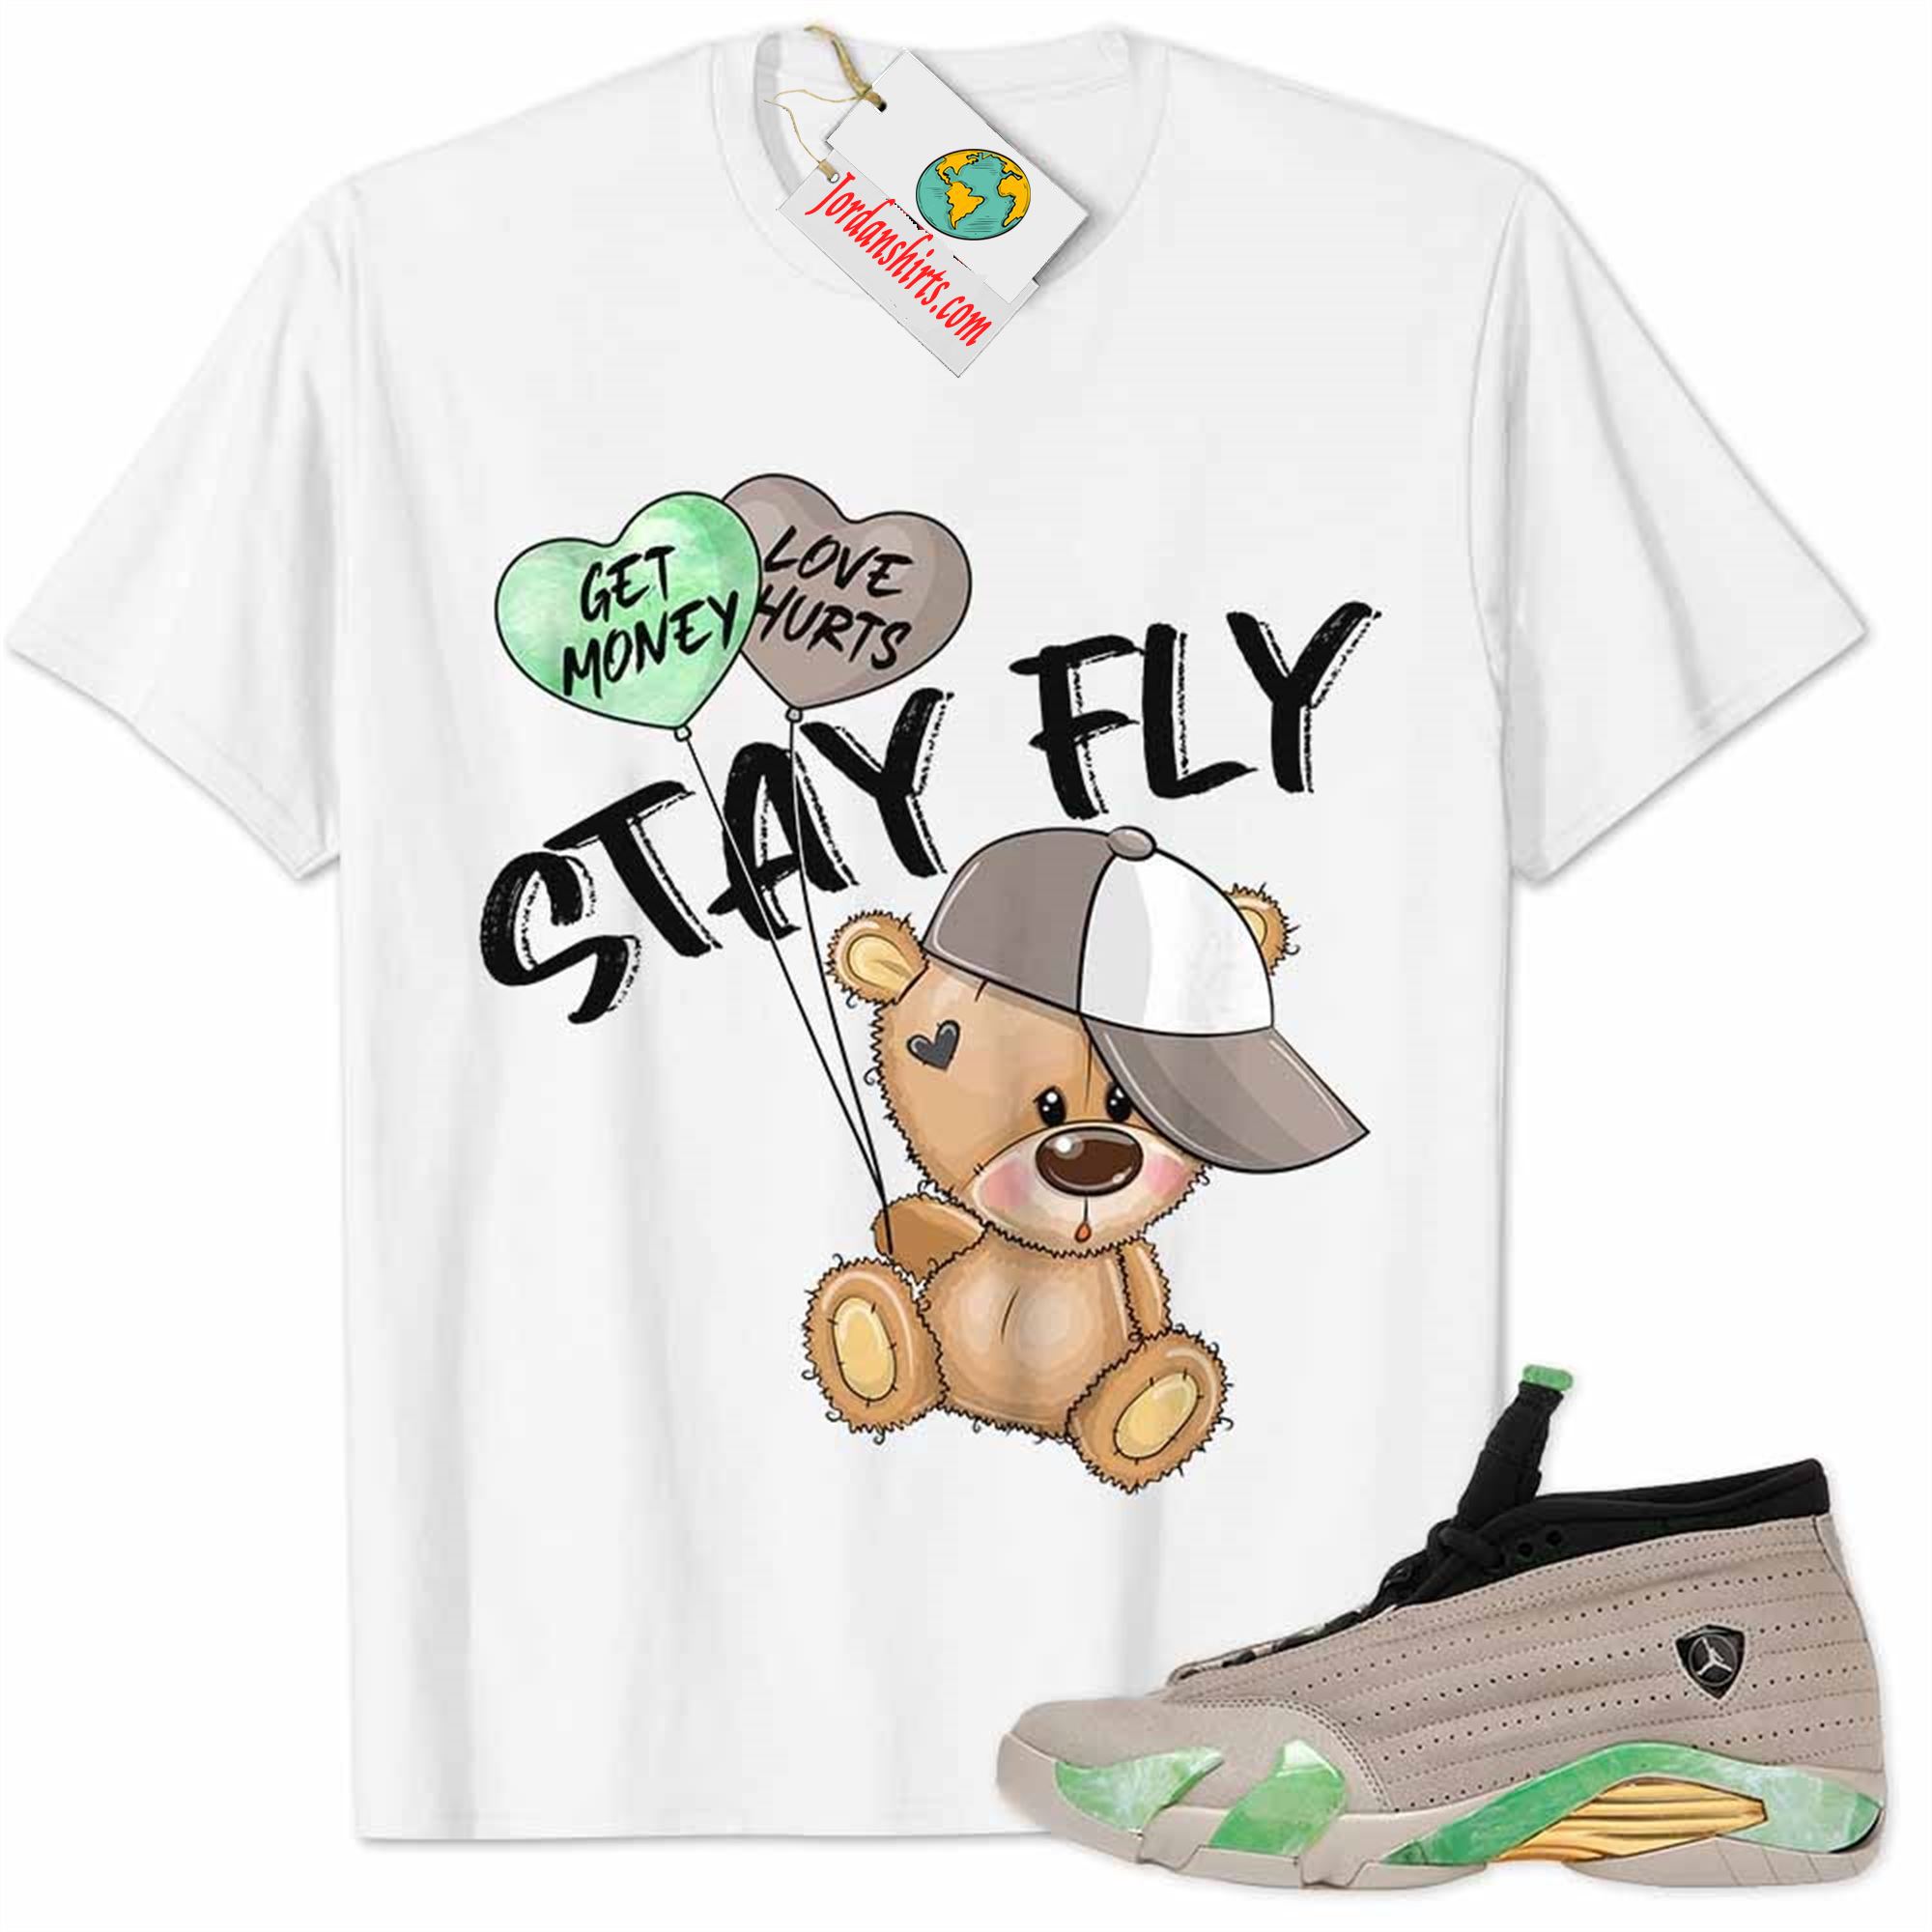 Jordan 14 Shirt, Aleali May Fortune 14s Shirt Cute Teddy Bear Stay Fly Get Money White Plus Size Up To 5xl